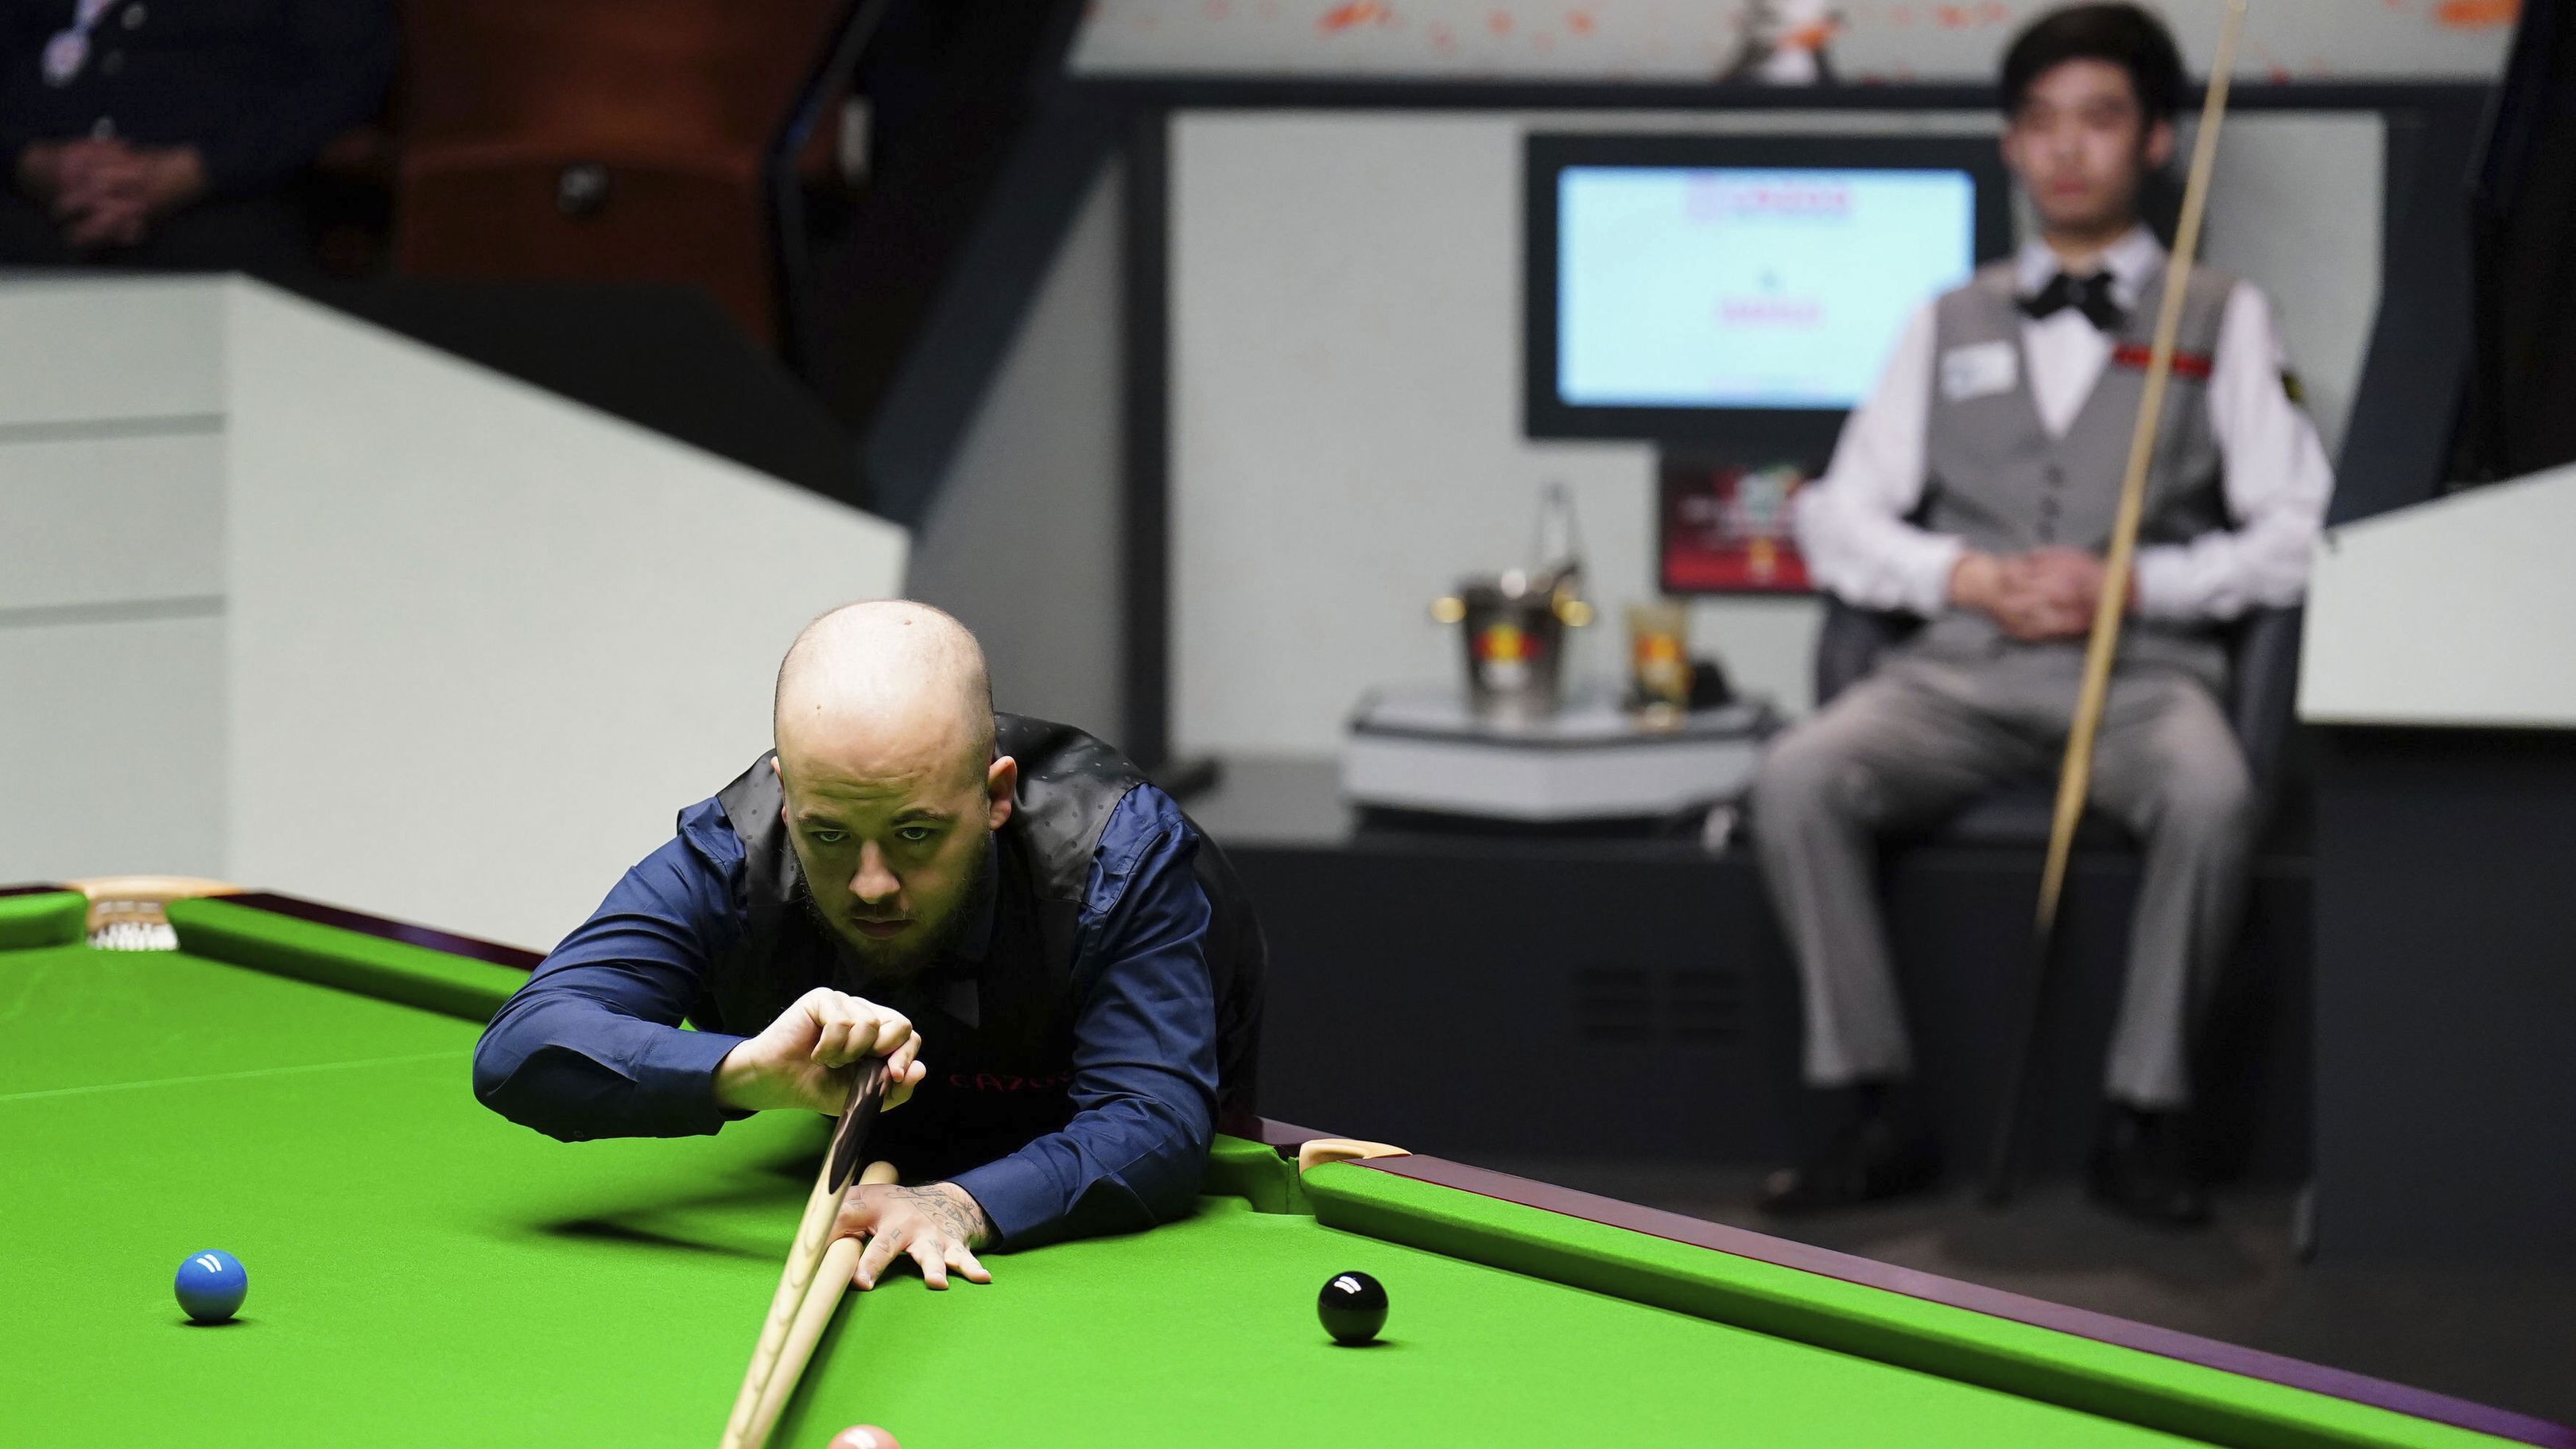 Belgium&#x27;s Luca Brecel in action against China&#x27;s Si Jiahui at the World Snooker Championship.